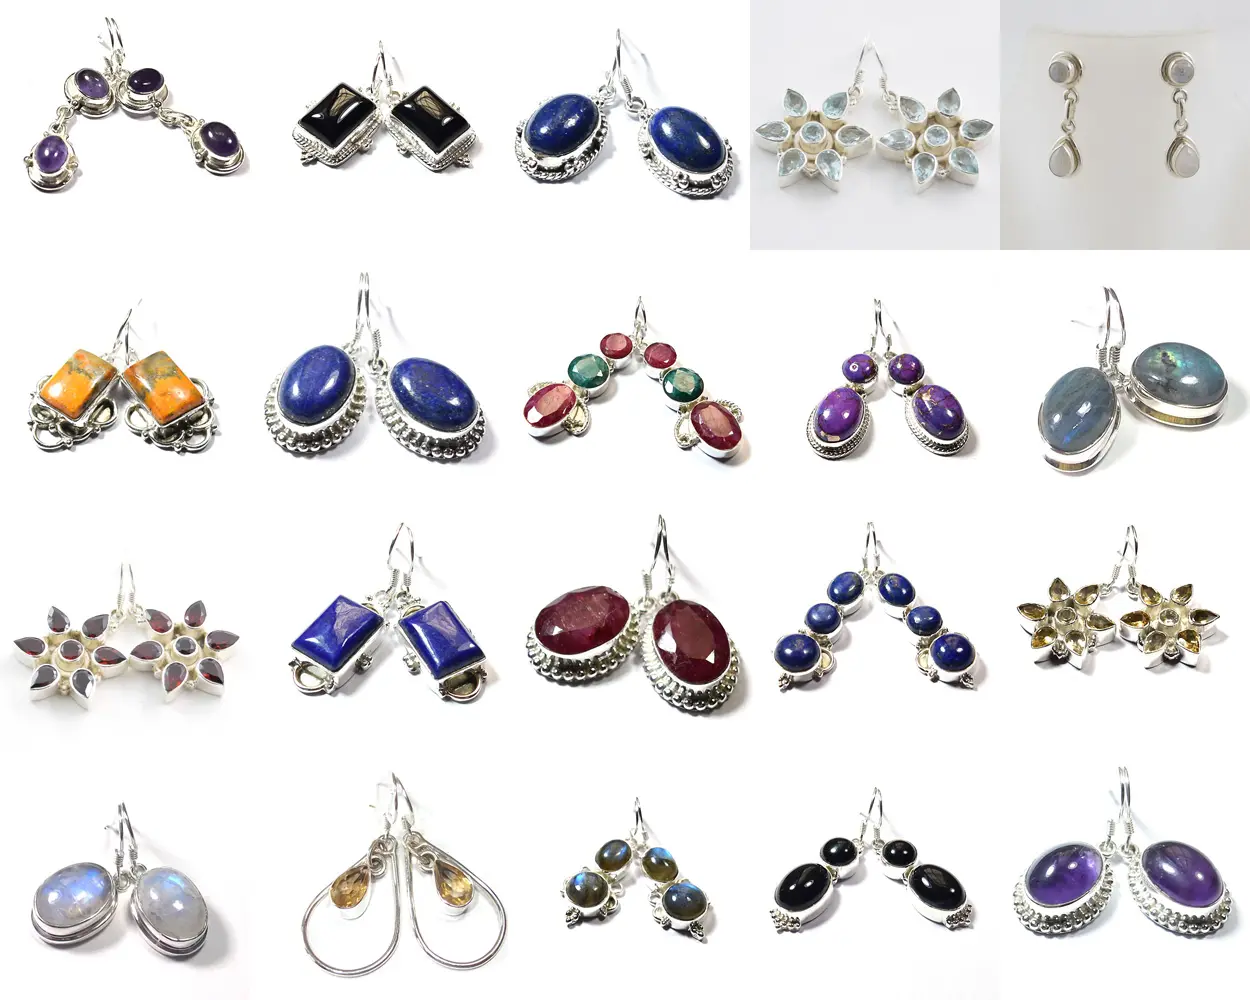 Pure sterling silver handmade assorted lot natural gemstone earrings wholesale ready stock jewelry